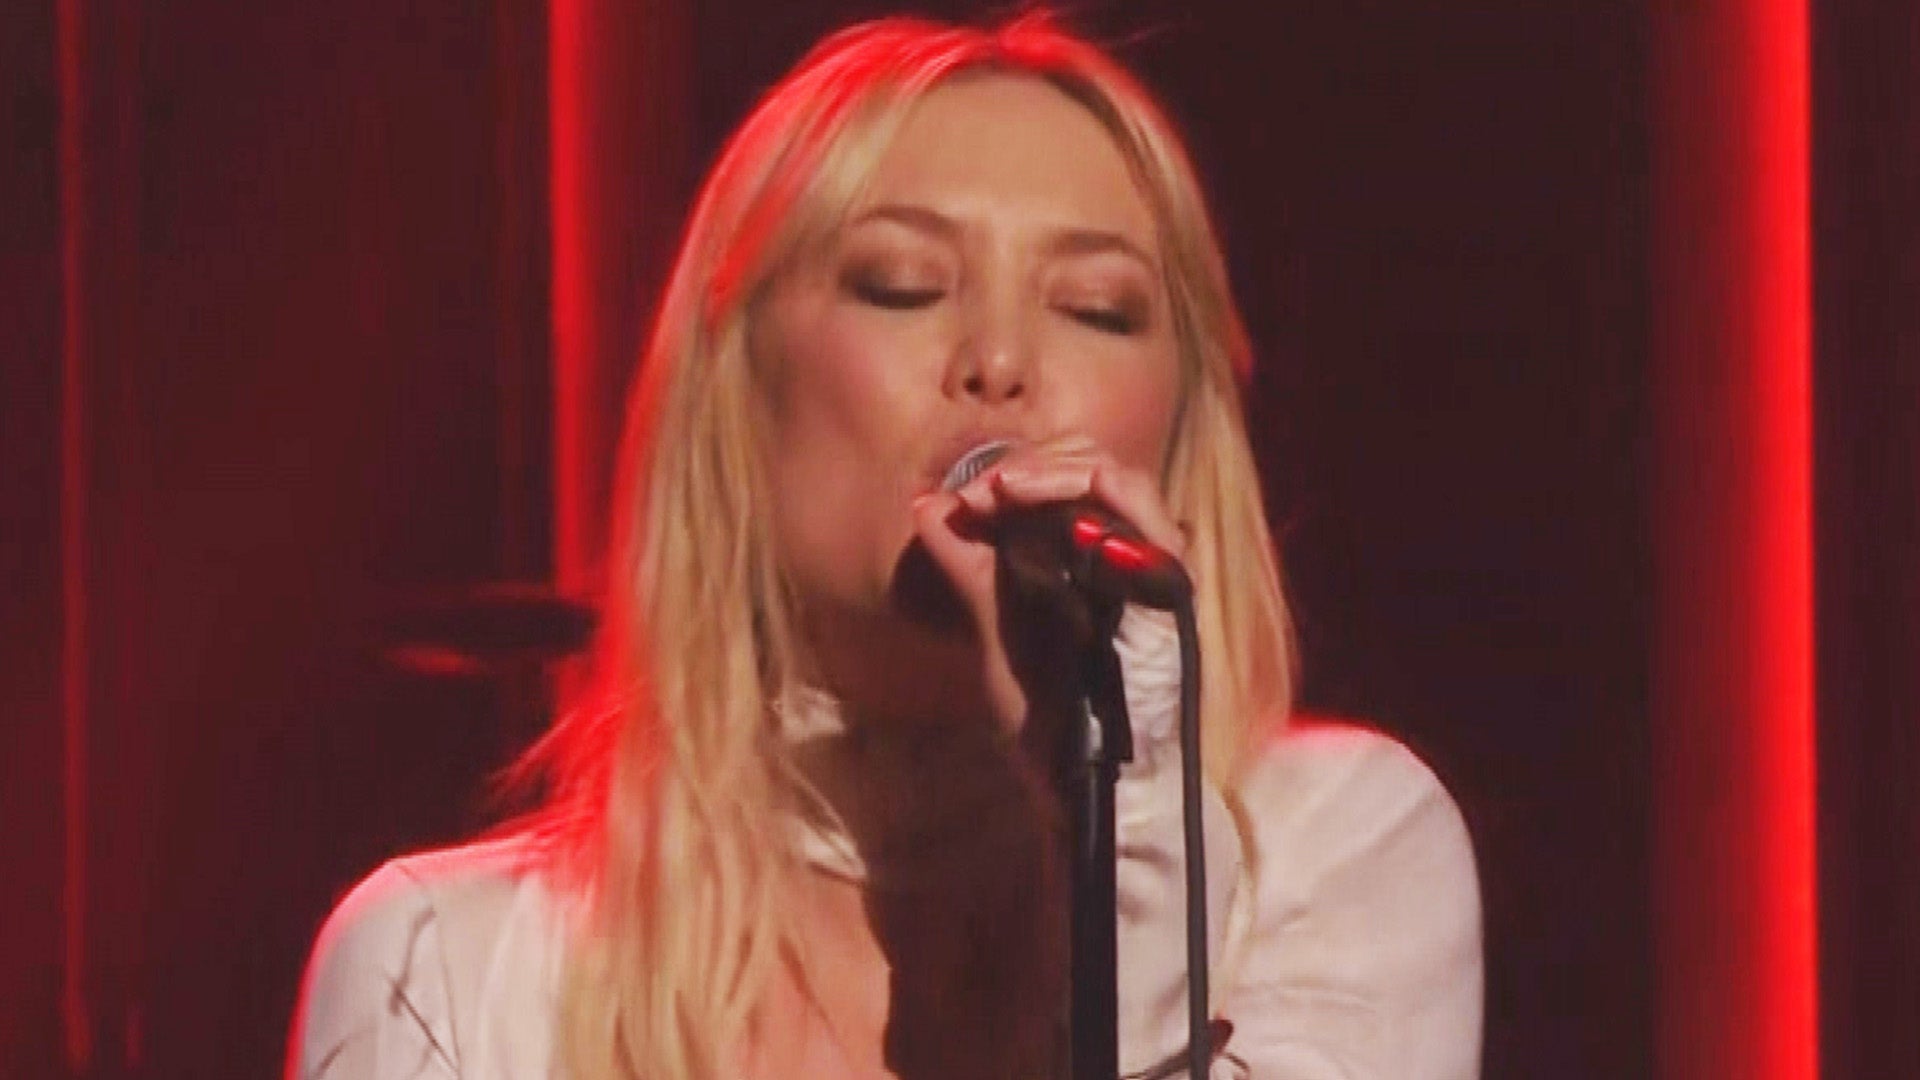 Kate Hudson Is a Rock Star! Watch Her Perform New Single